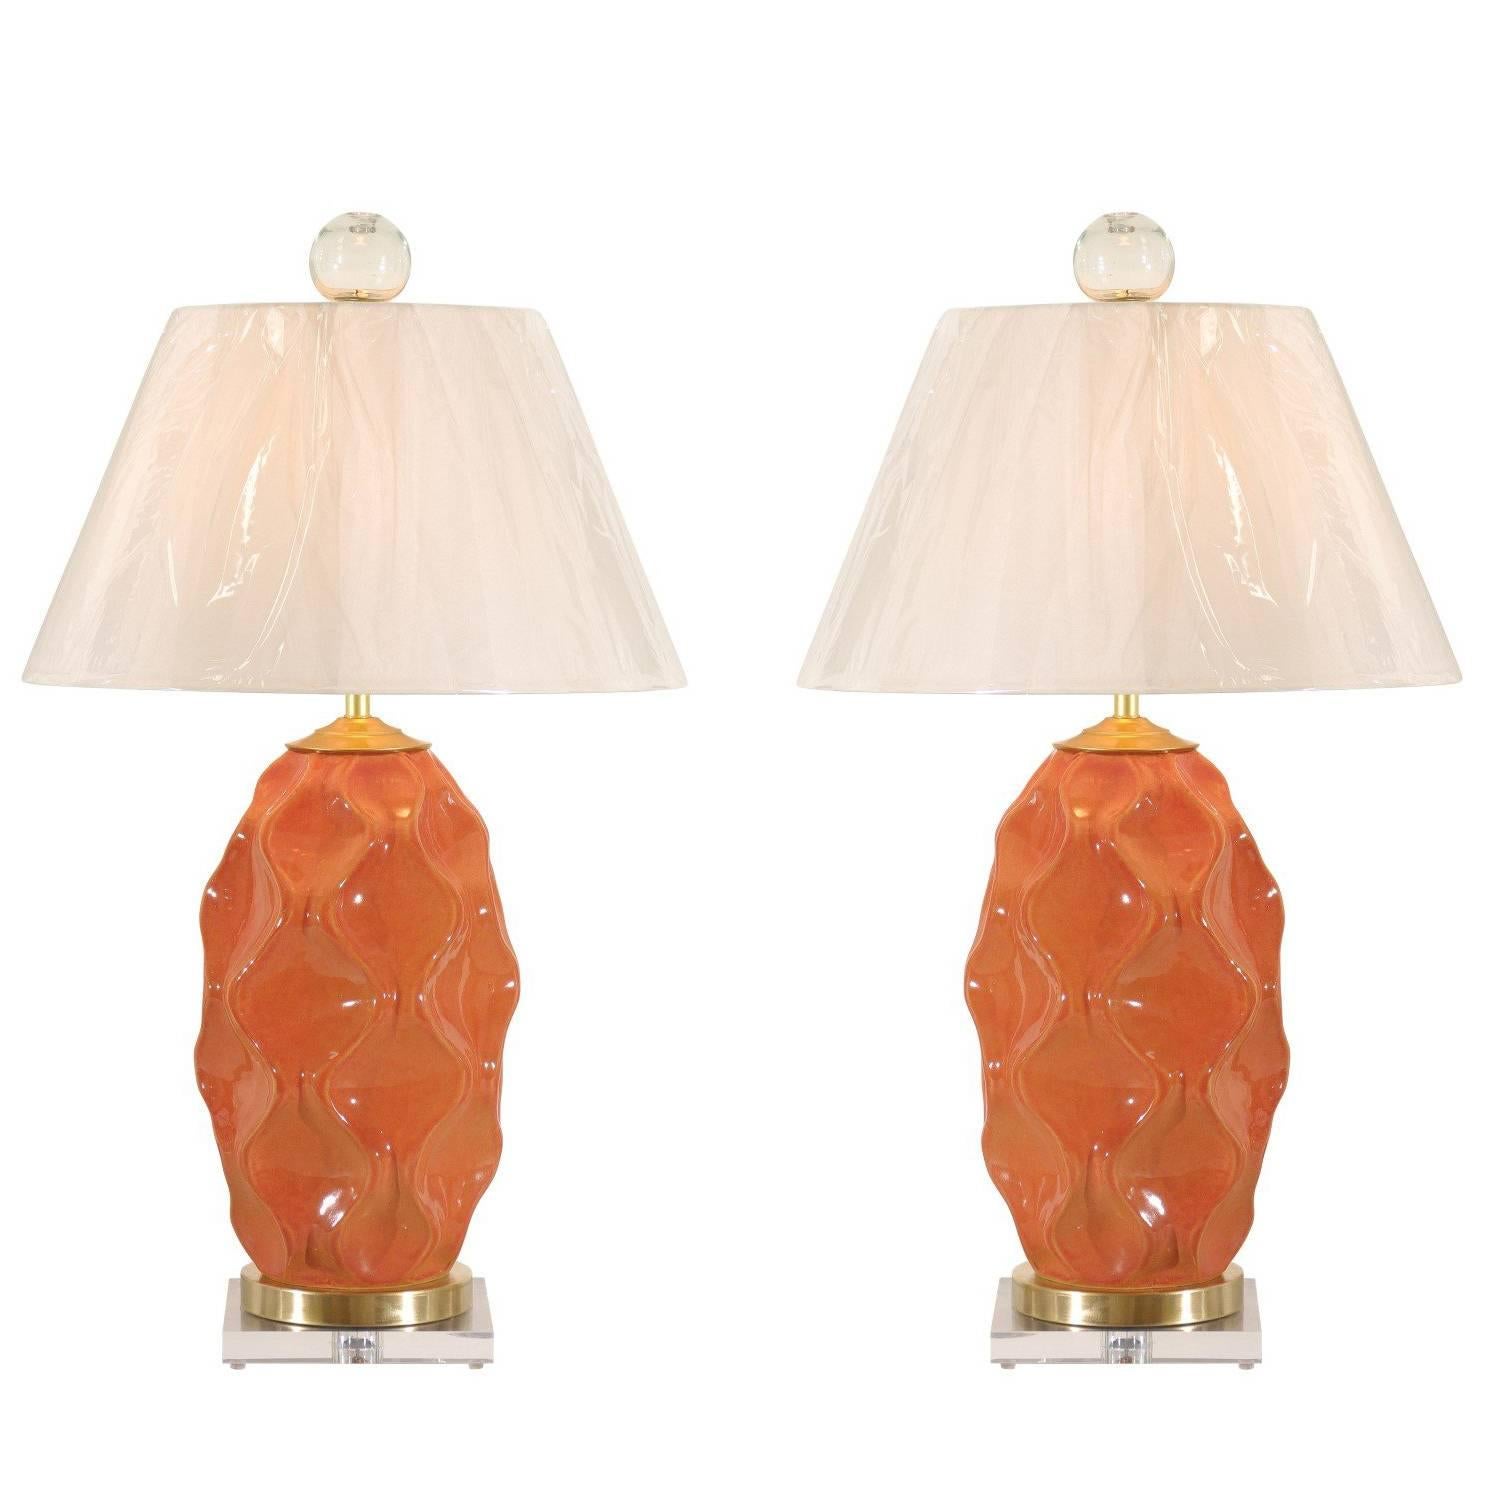 Dazzling Pair of Large-Scale Faceted Ceramic Lamps in Aged Orange